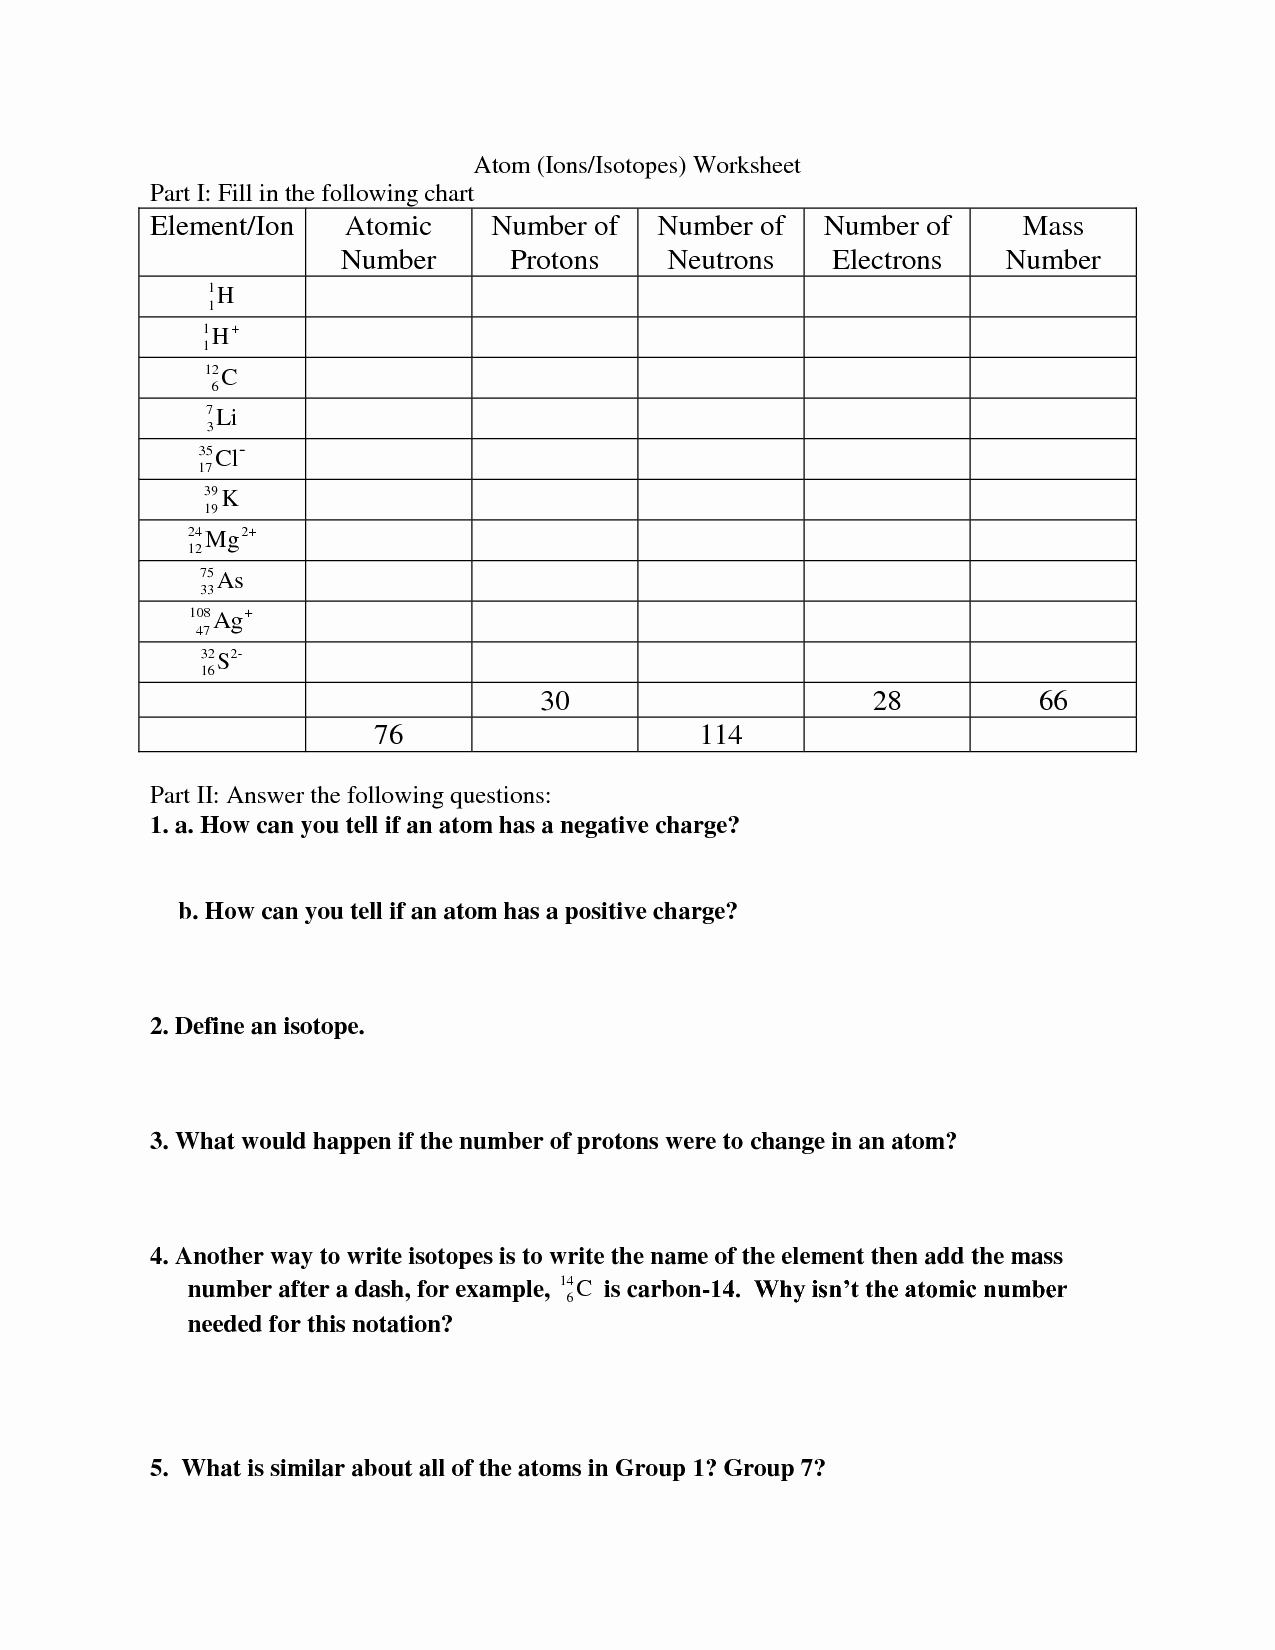 Atoms and isotopes Worksheet Answers Unique 16 Best Of Molecules and atoms Worksheet Answer Key